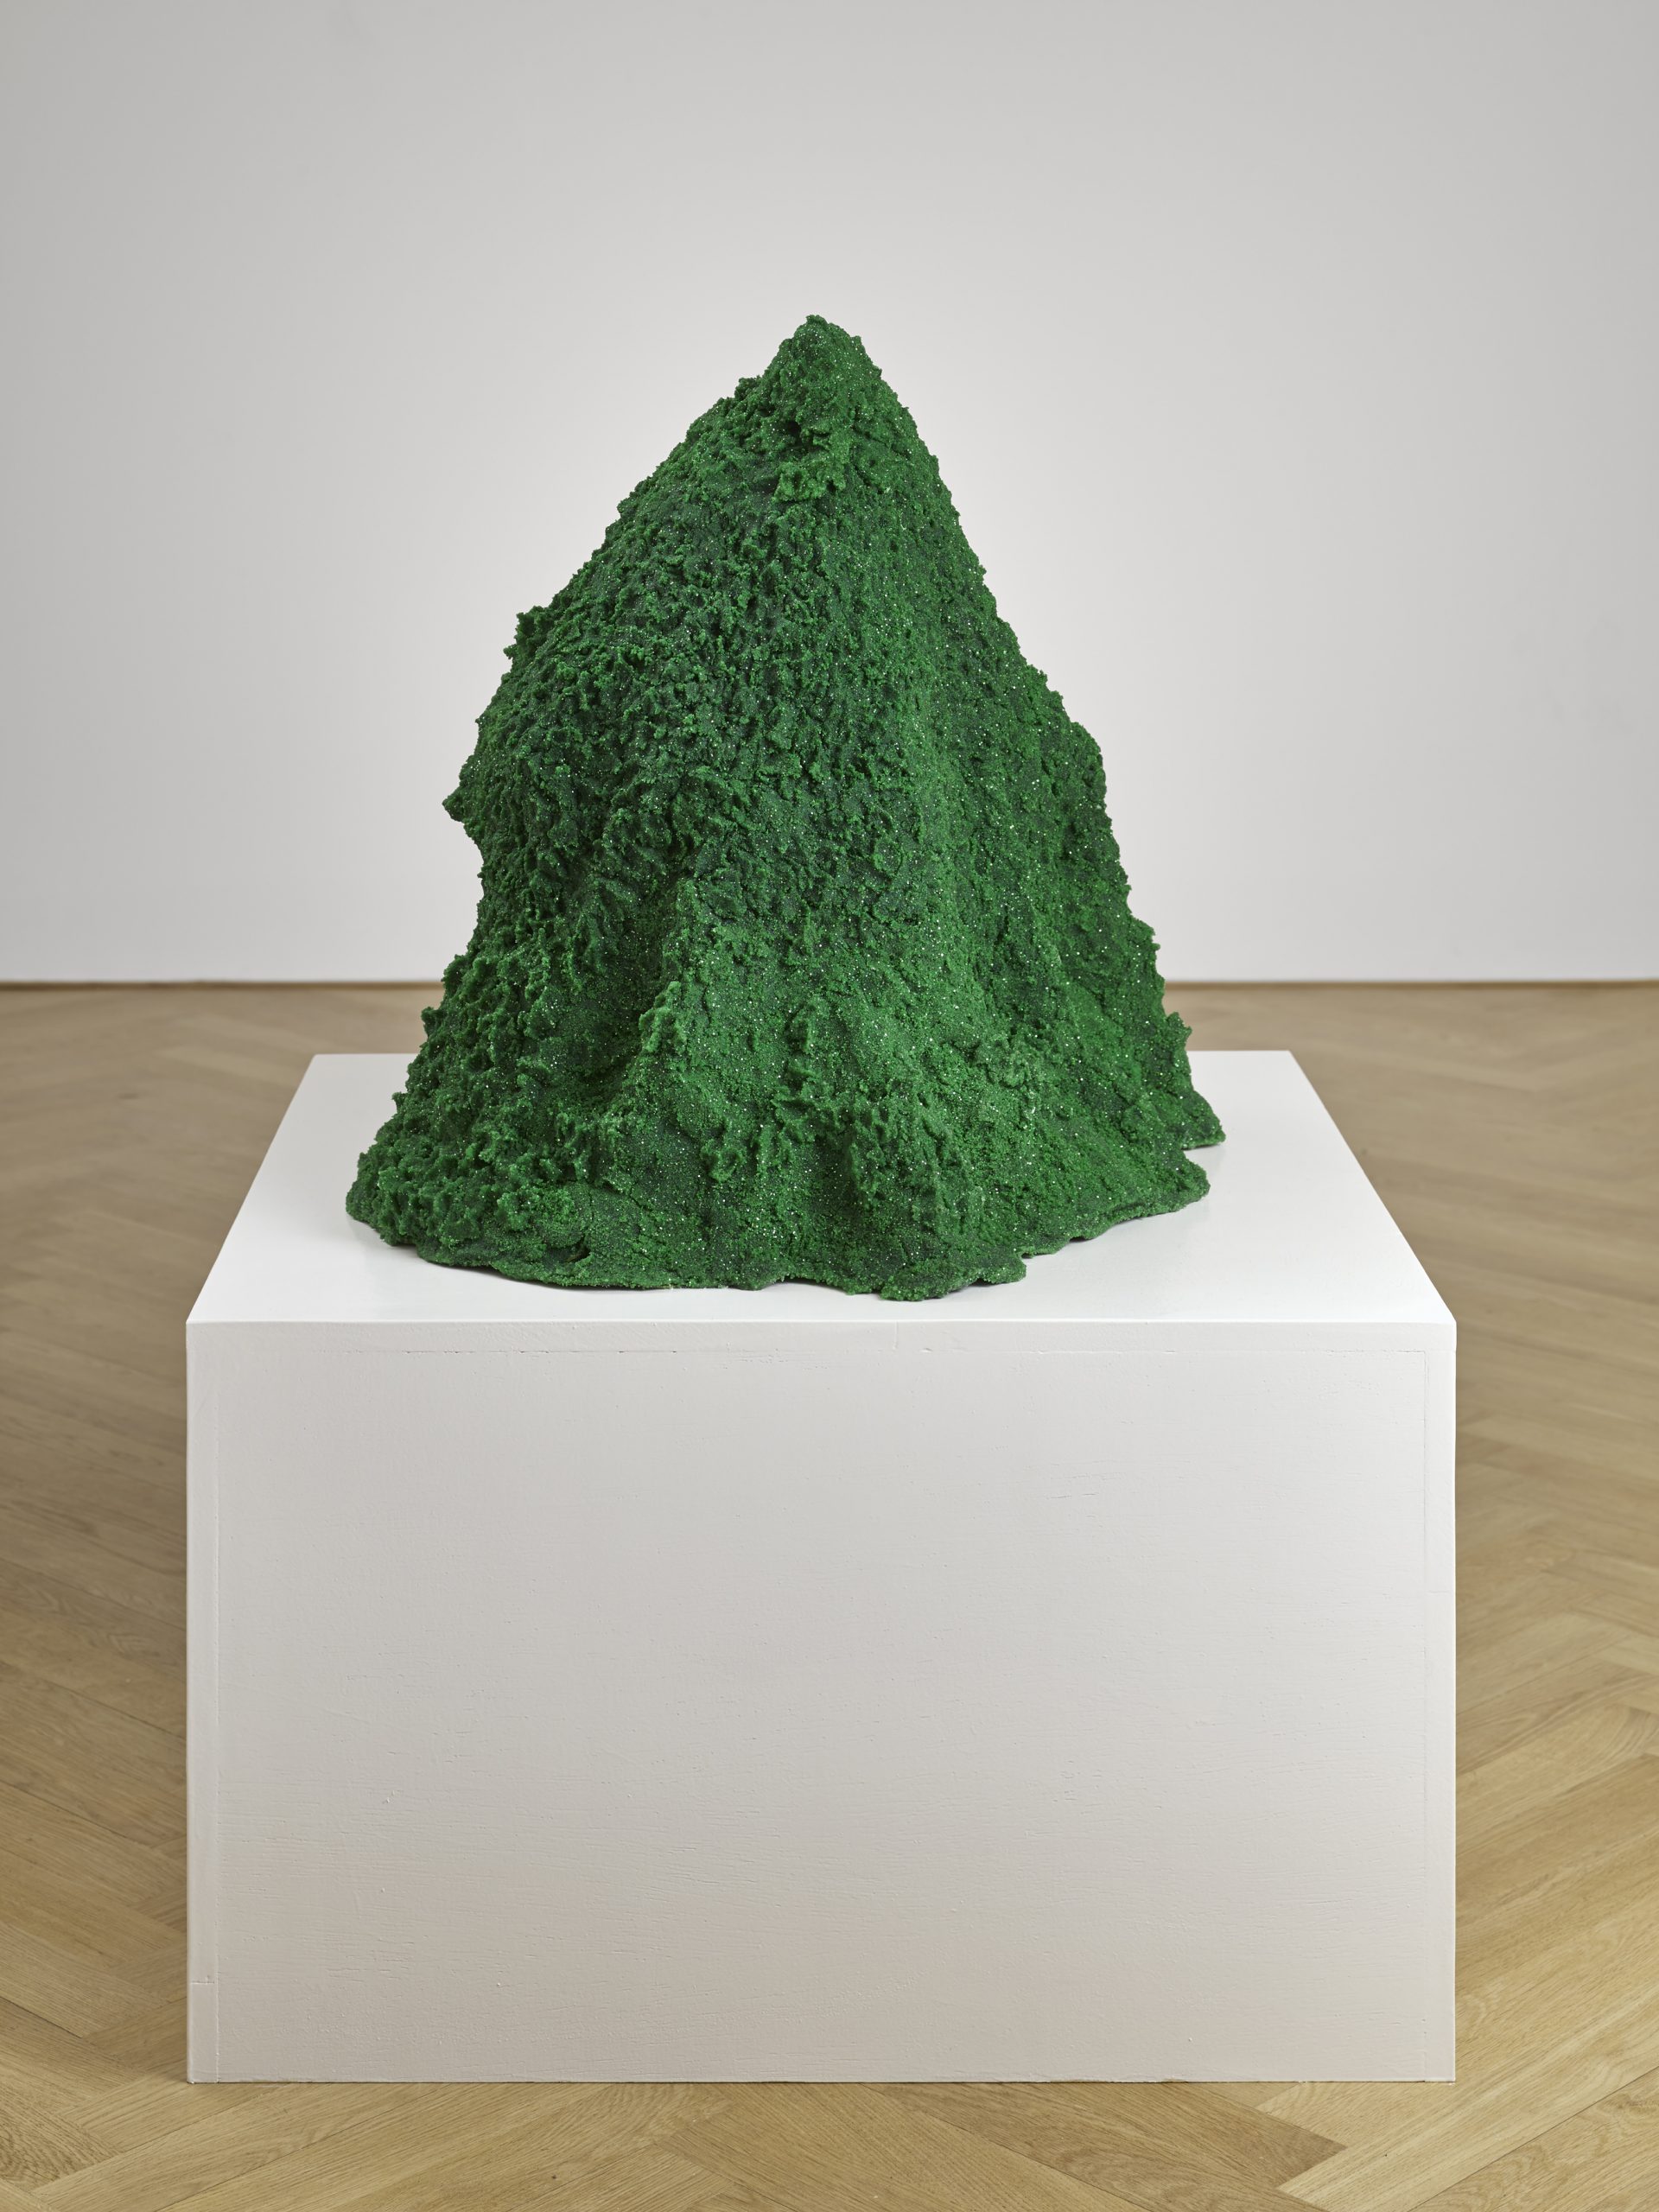 A mountain-like green mound of colored sand, gold, glitter, and crystals sits on a white pedestal in an art gallery.